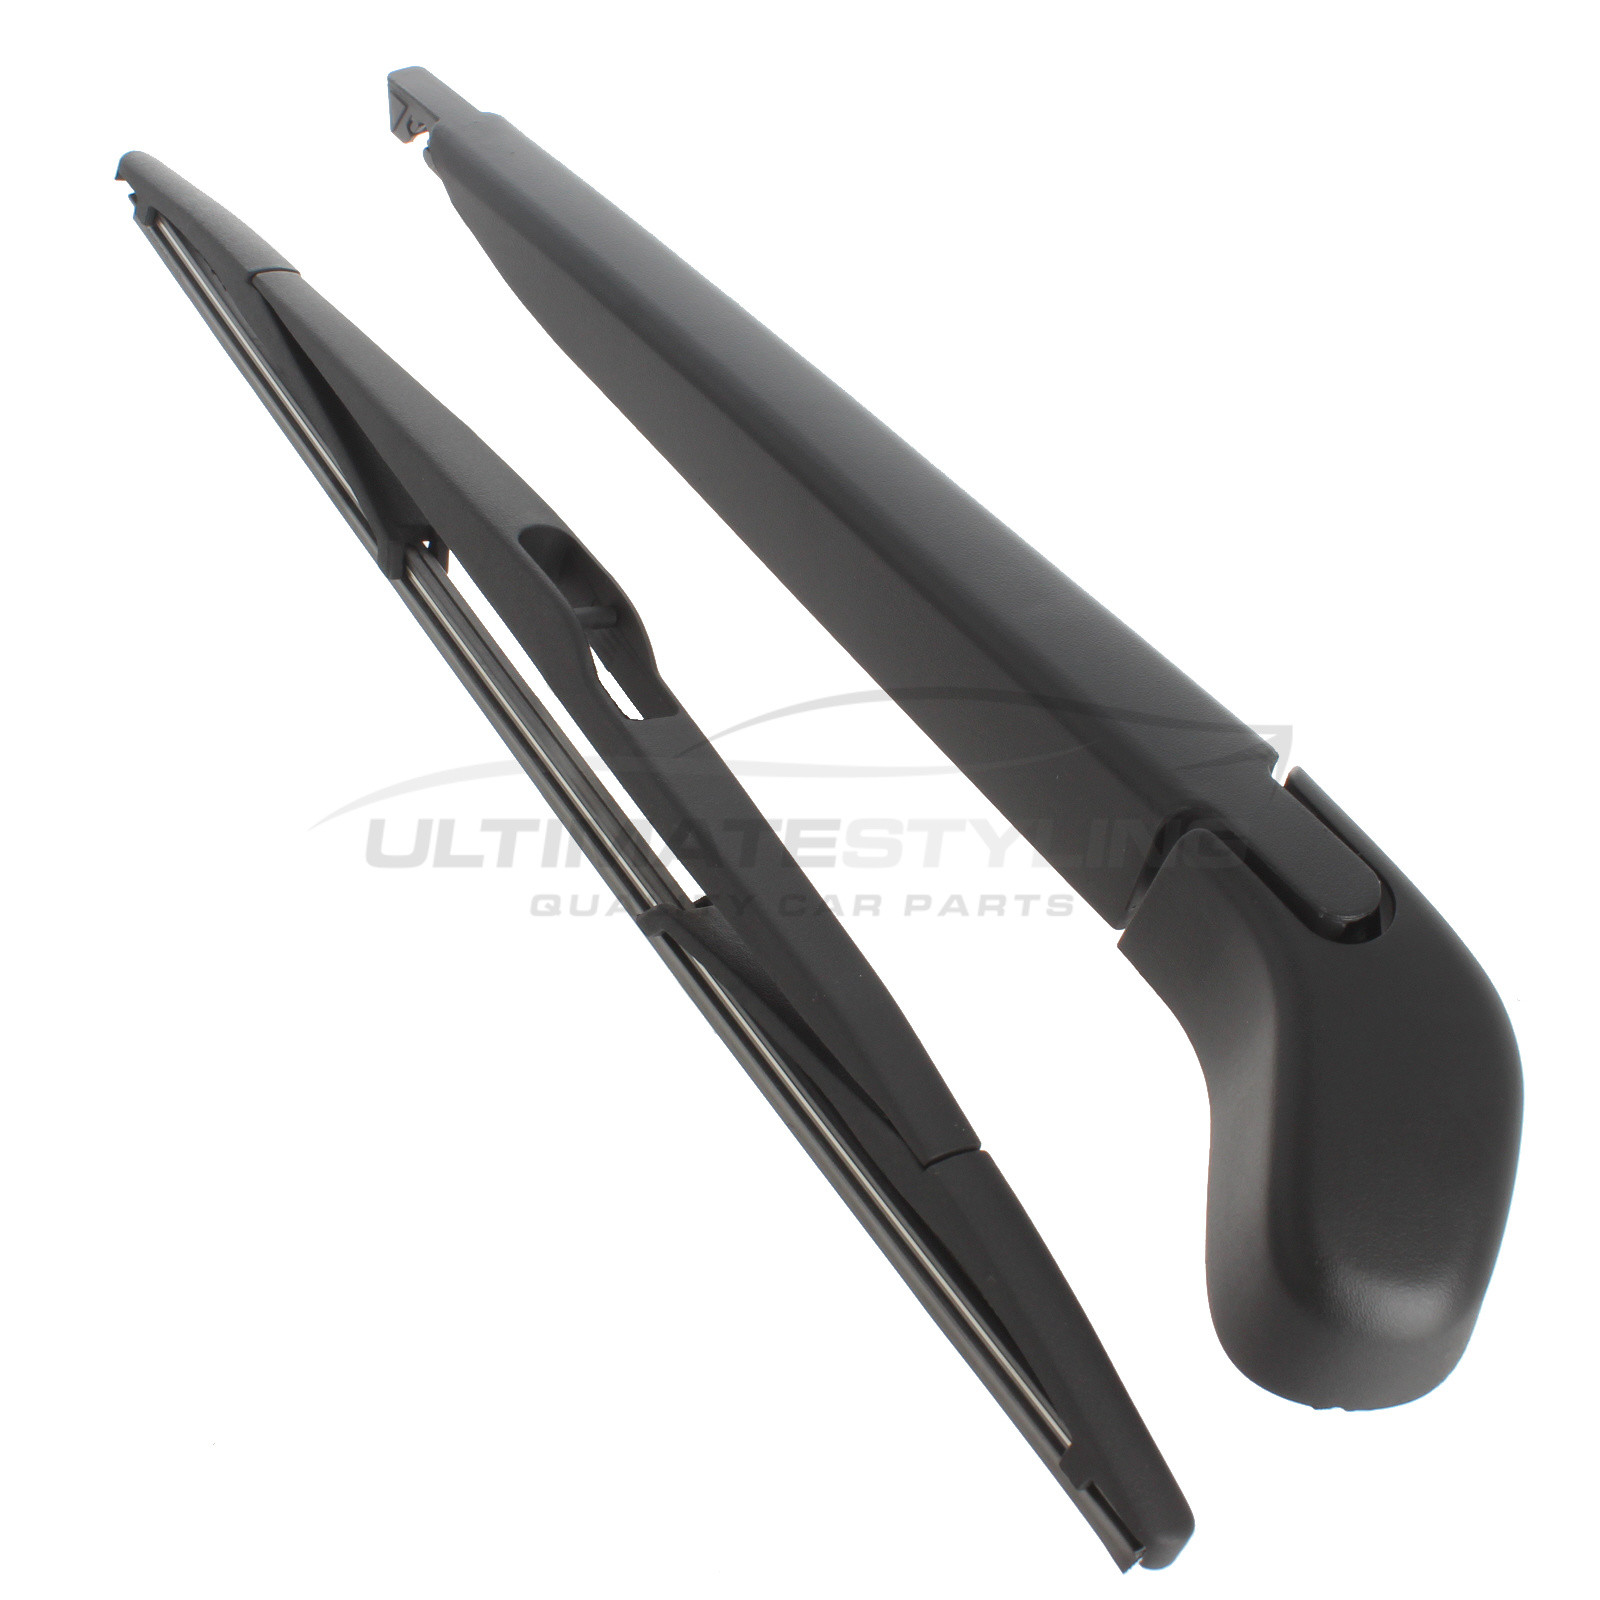 Rear Wiper Arm & Blade Set for Ford Focus